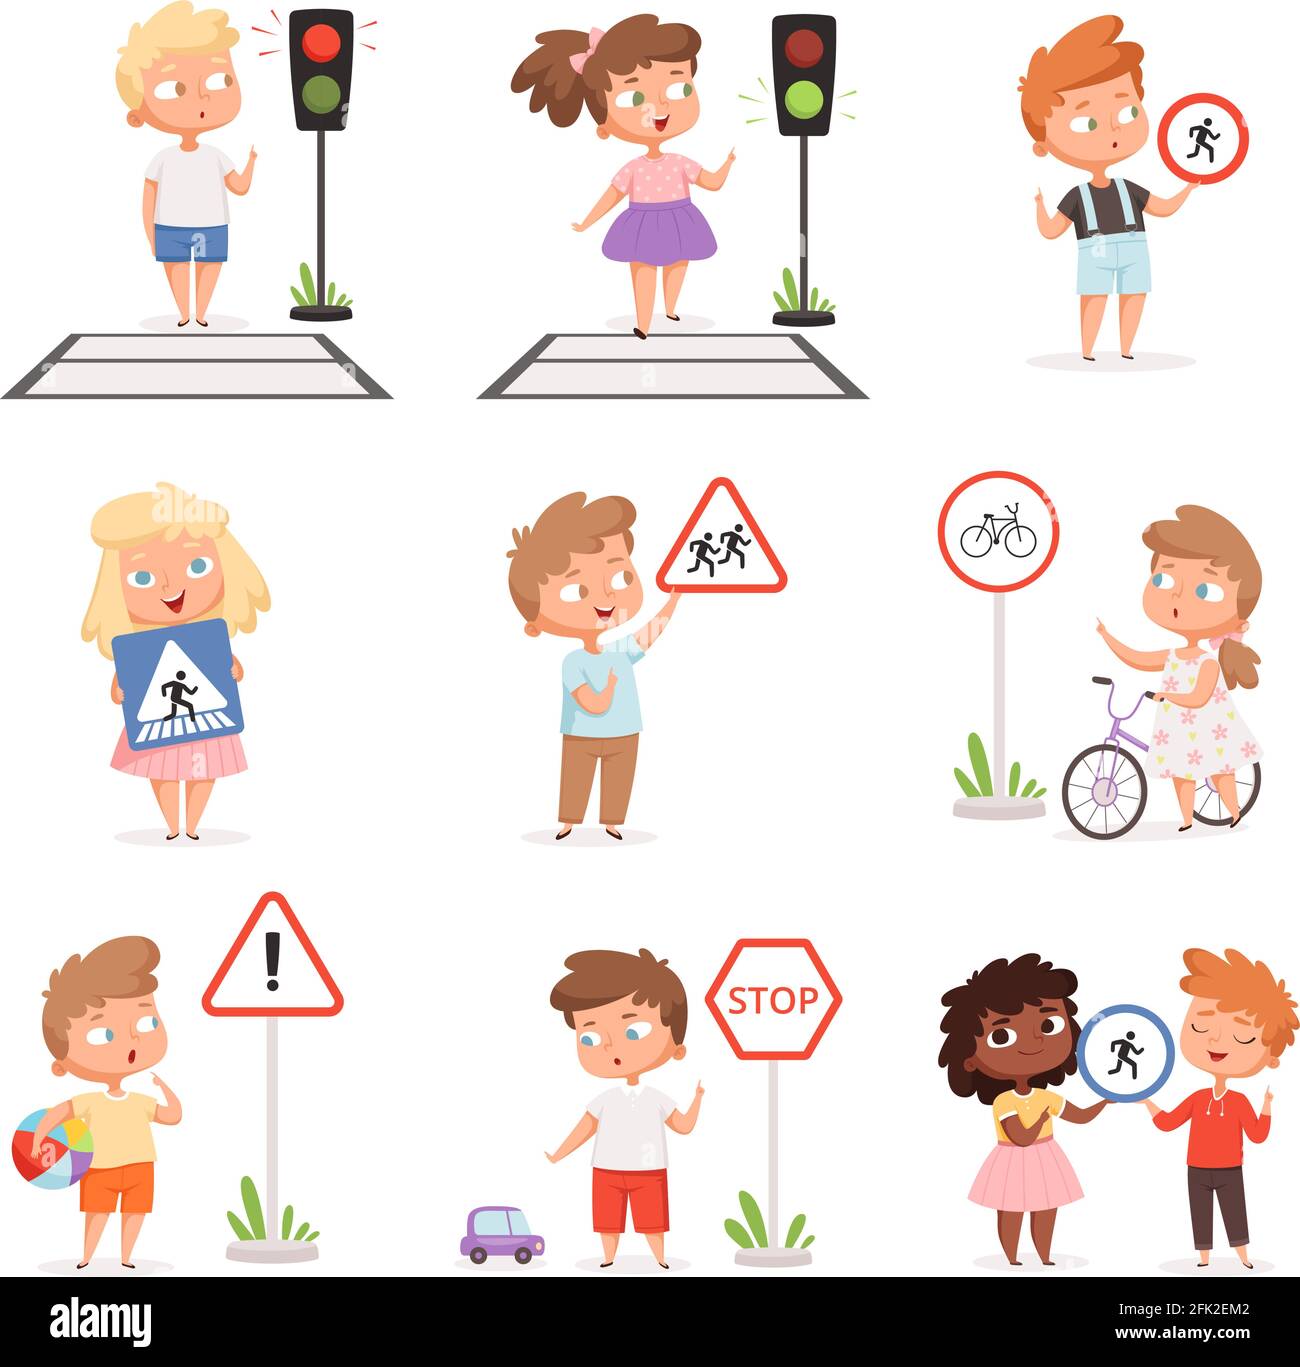 Traffic road education. School kids learning safety crossroad walking traffic lights and signs vector illustrations set Stock Vector